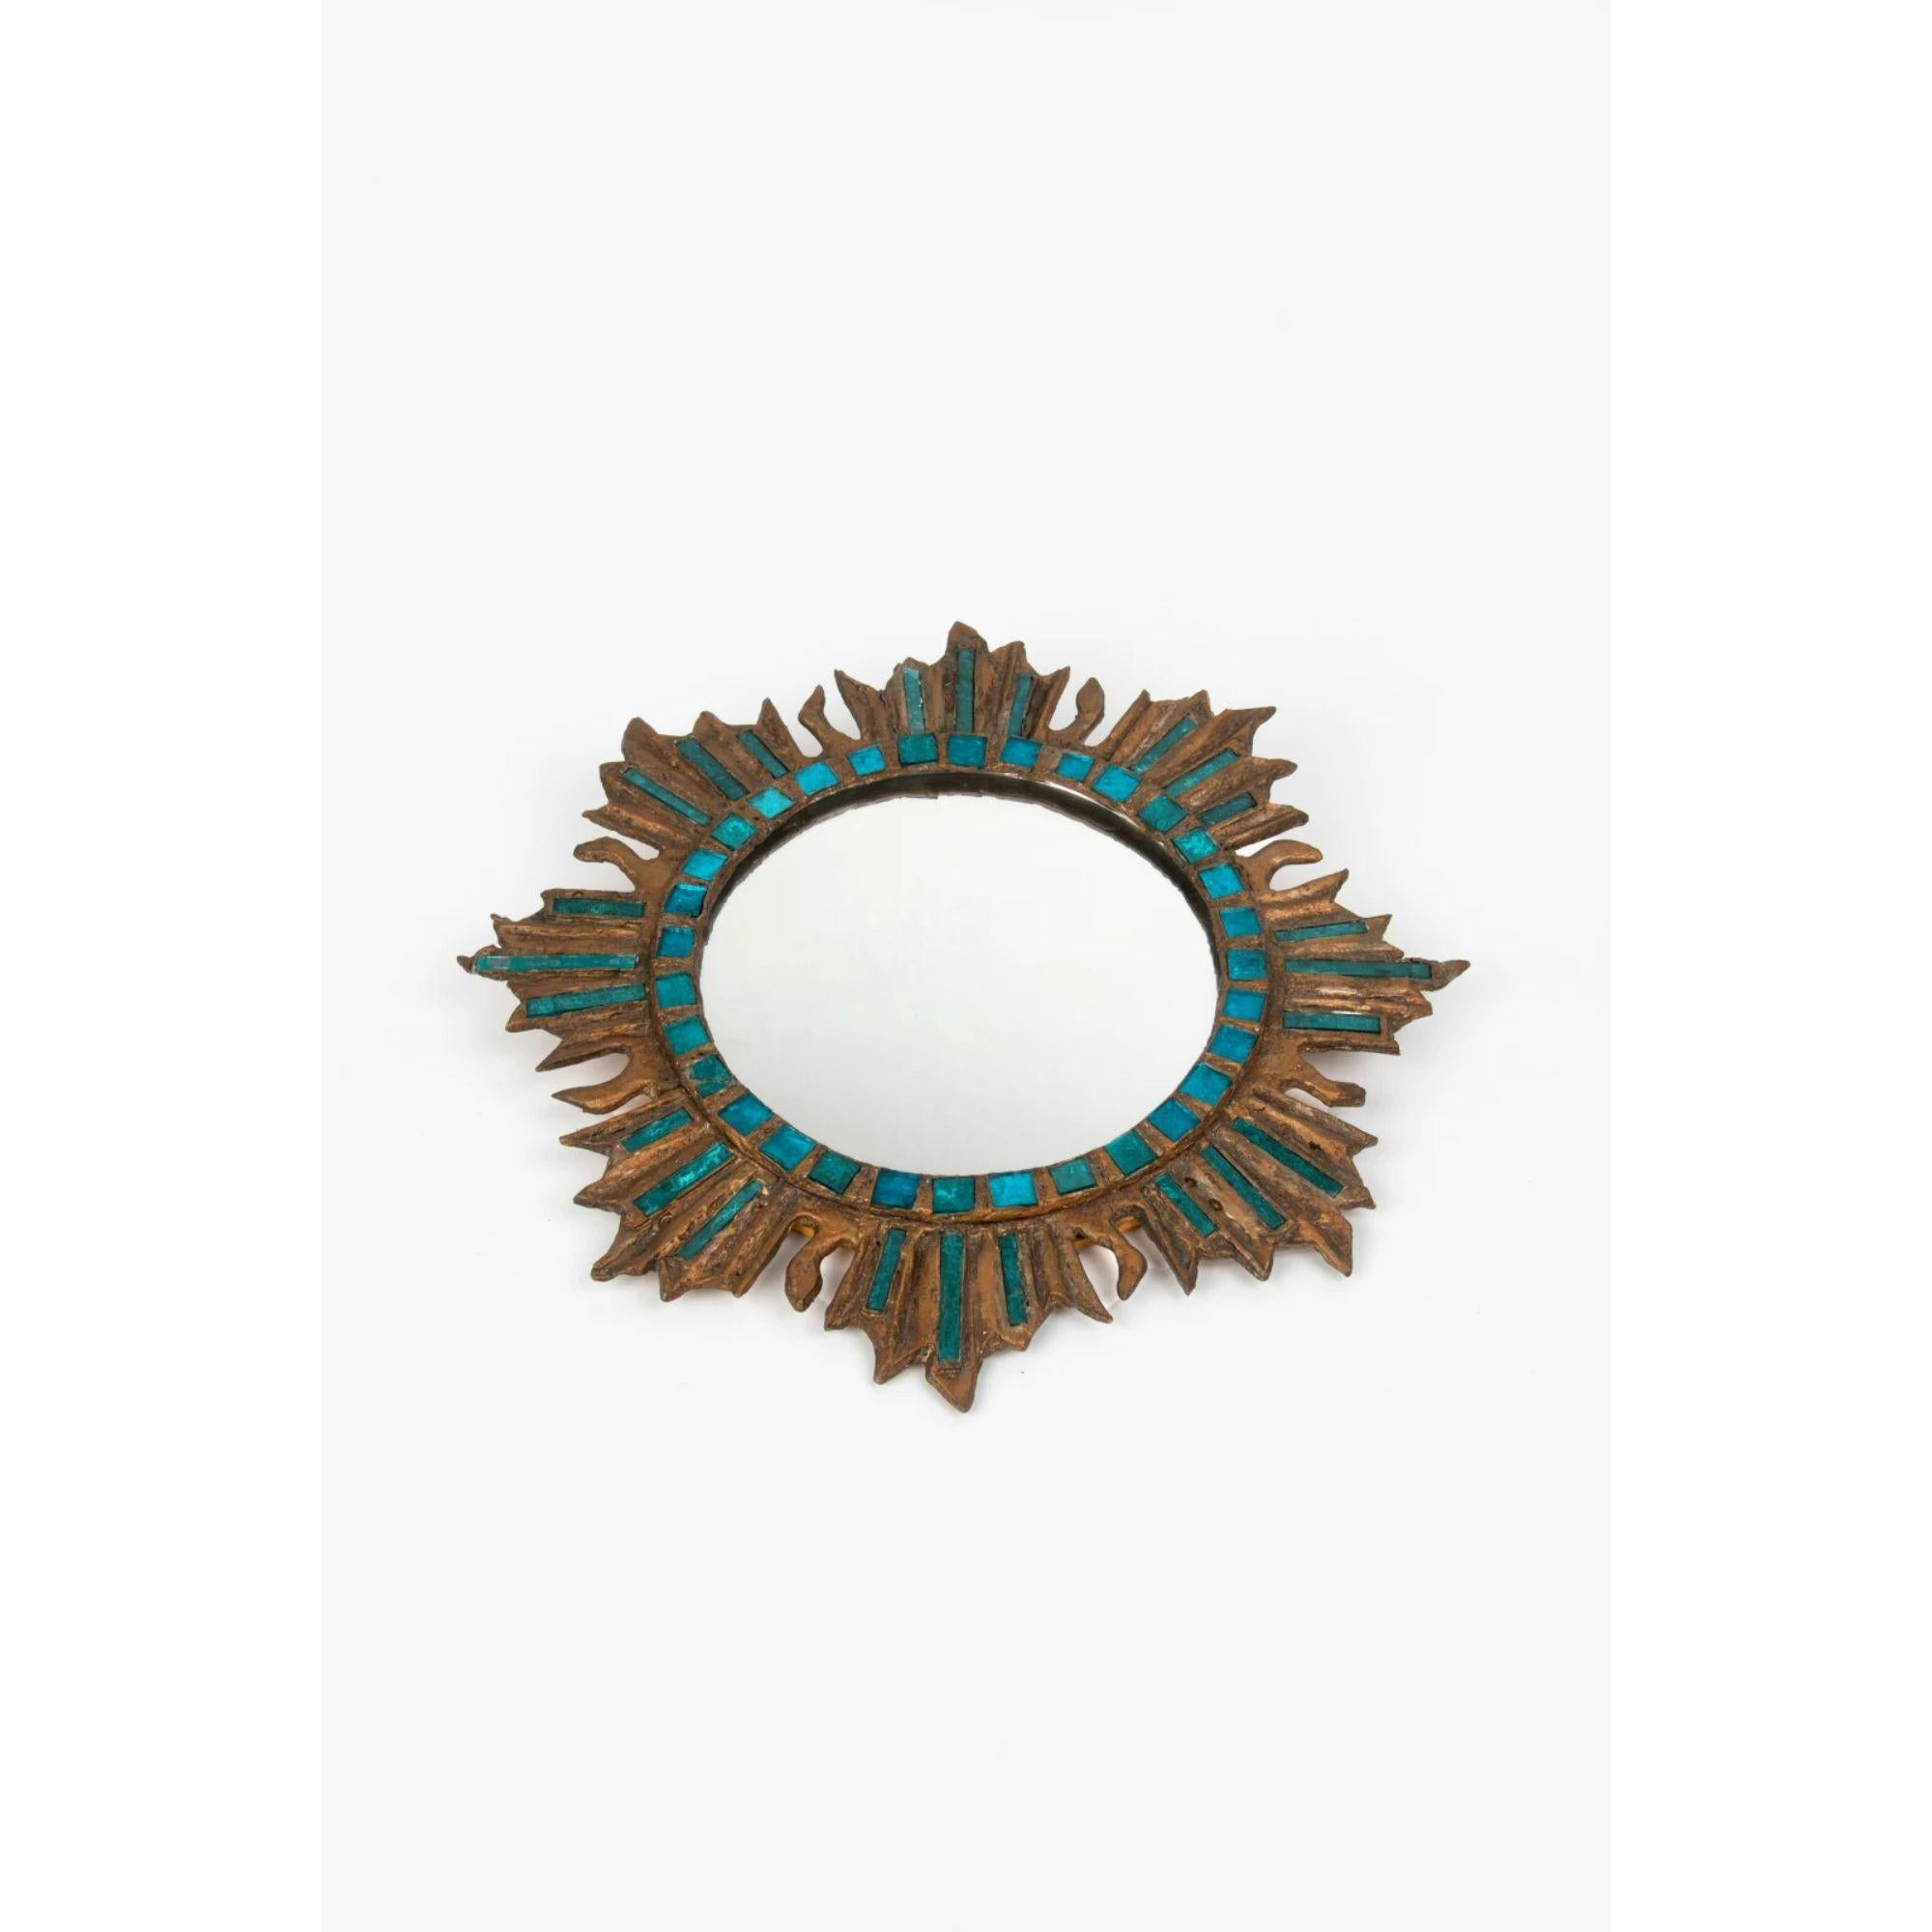 Sunburst mirror in the Style of Line Vautrin, 1960s.

A very stylish sunburst mirror made in the style of Line Vautrin.

The decorative metal frame is patinated to a dark gold colour and embellished with coloured mirror fragments.

Condition: